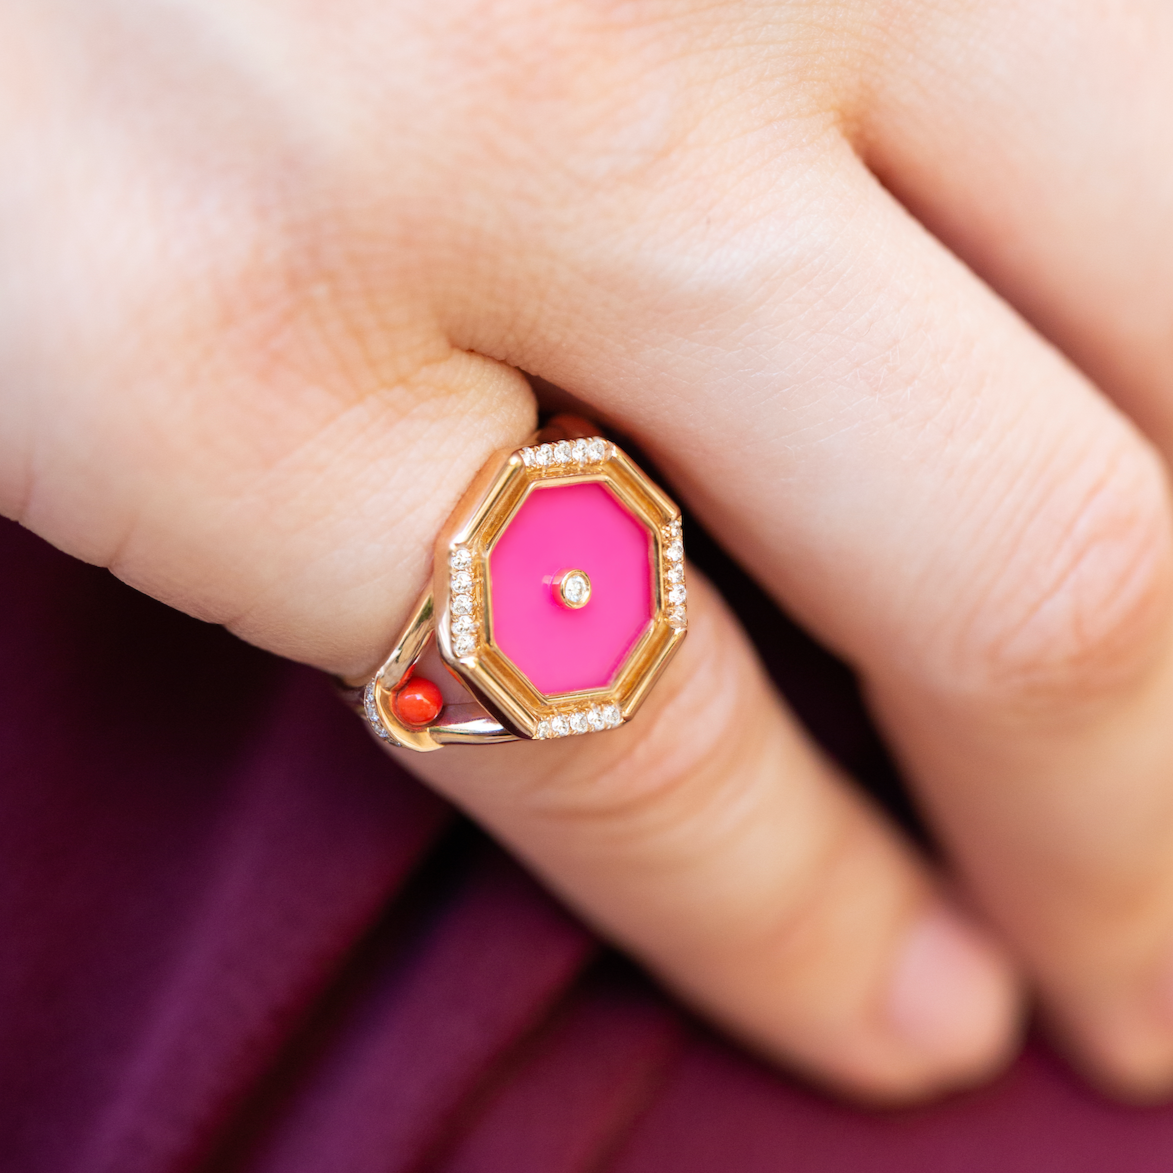 Hexagon Amulet Pinky Ring, Pink Agate Cocktail Latelier Nawbar   